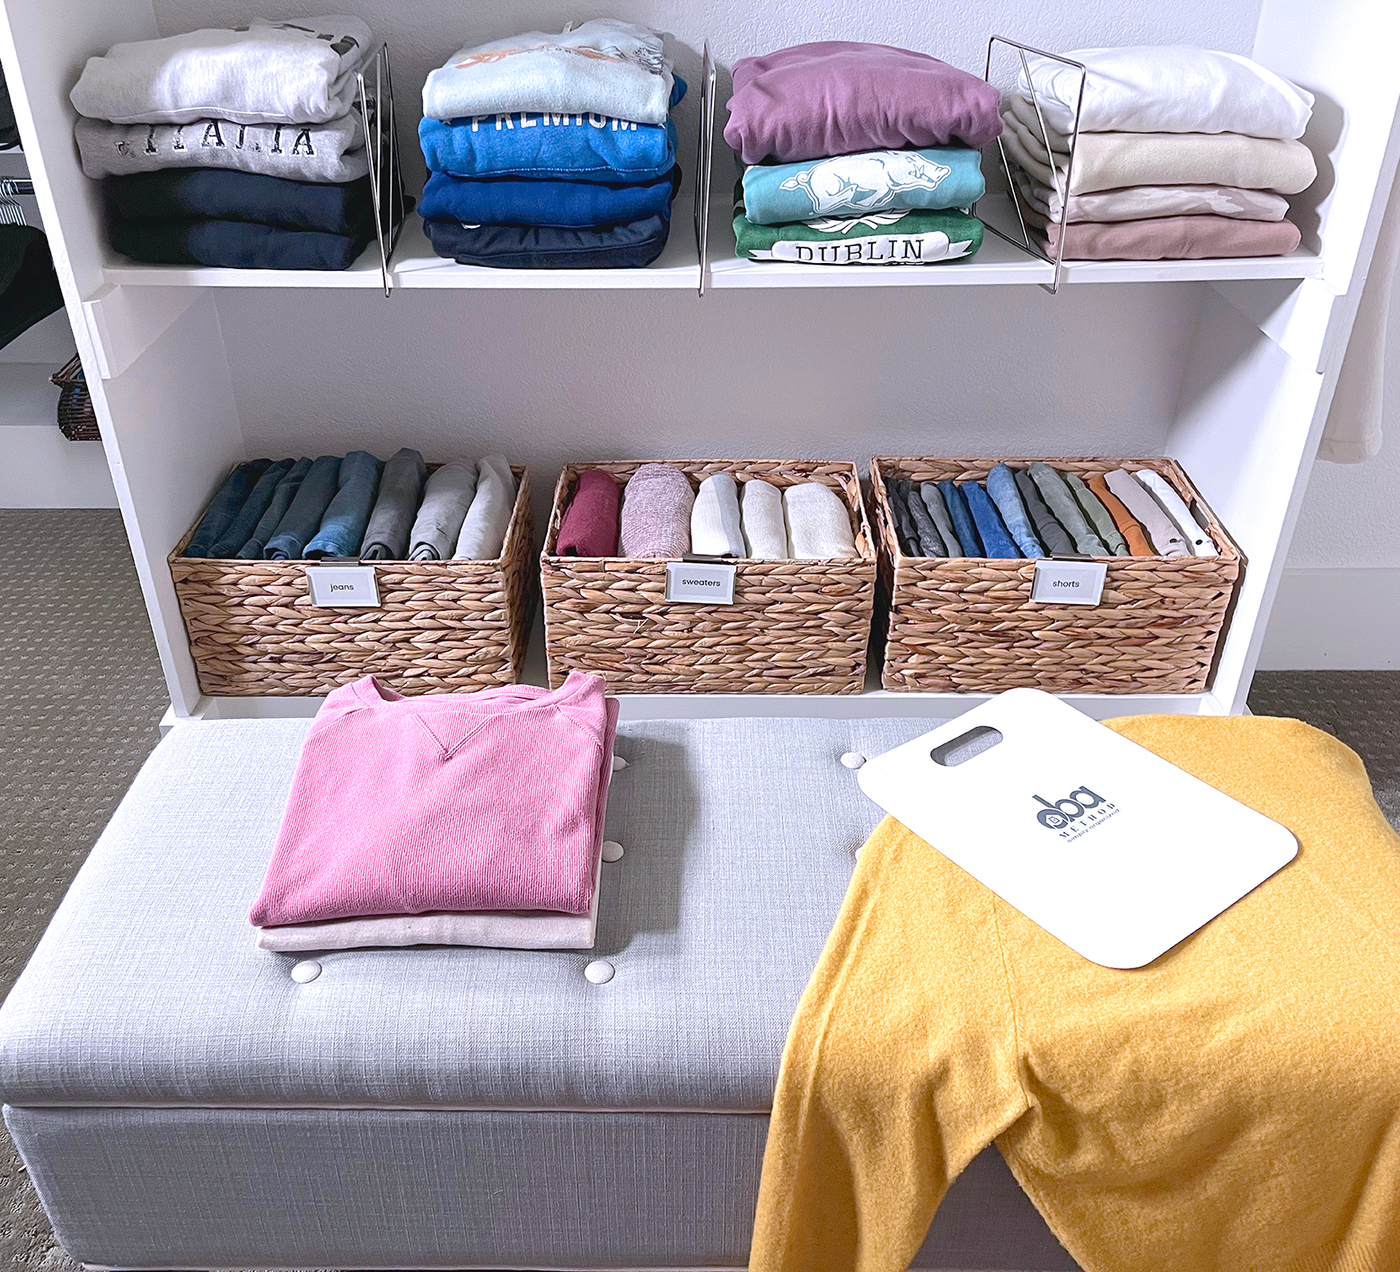 Clothes folded with Perfect Fold Board and stacked in organizing bins